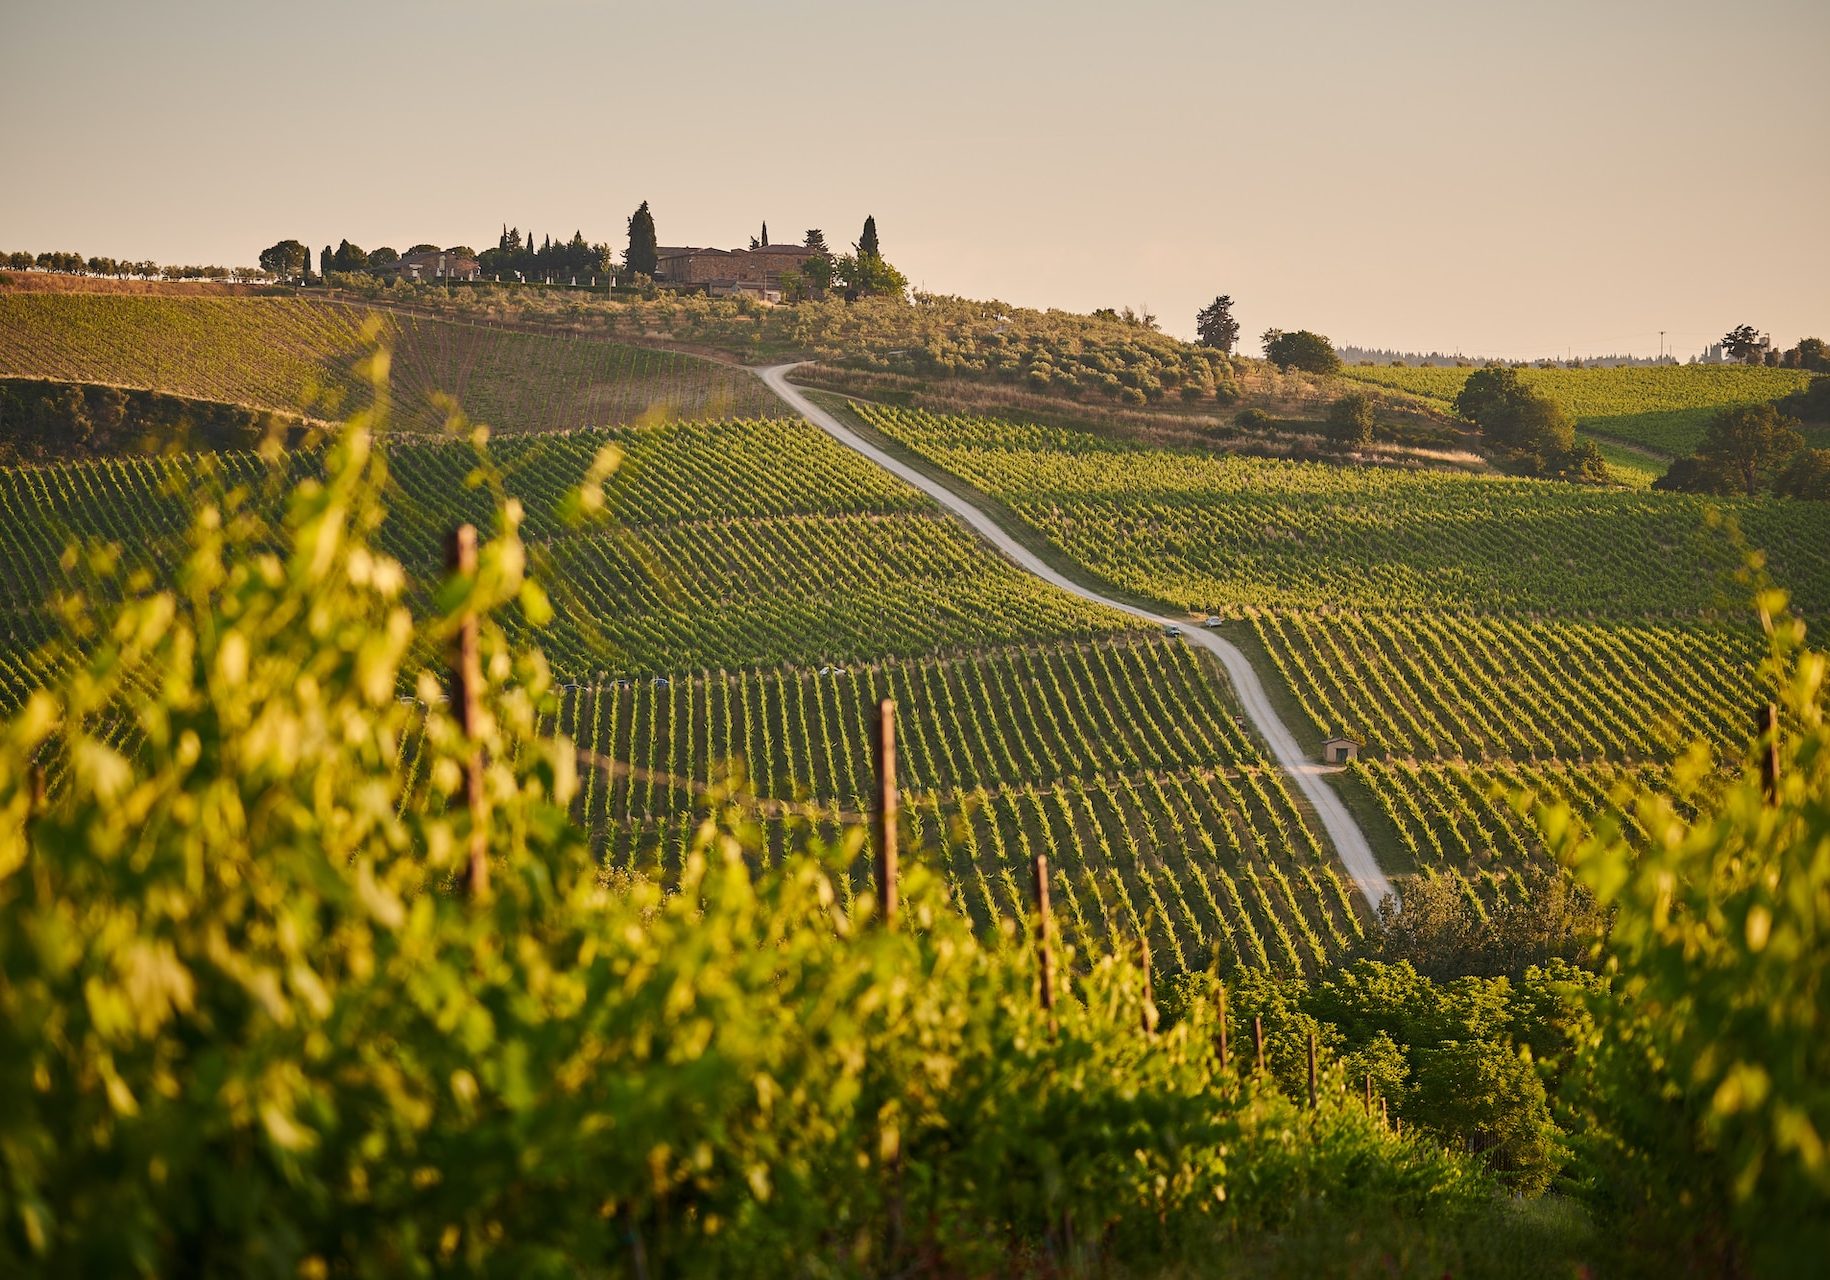 discover italy's wine at the rolling hills covered in vineyards